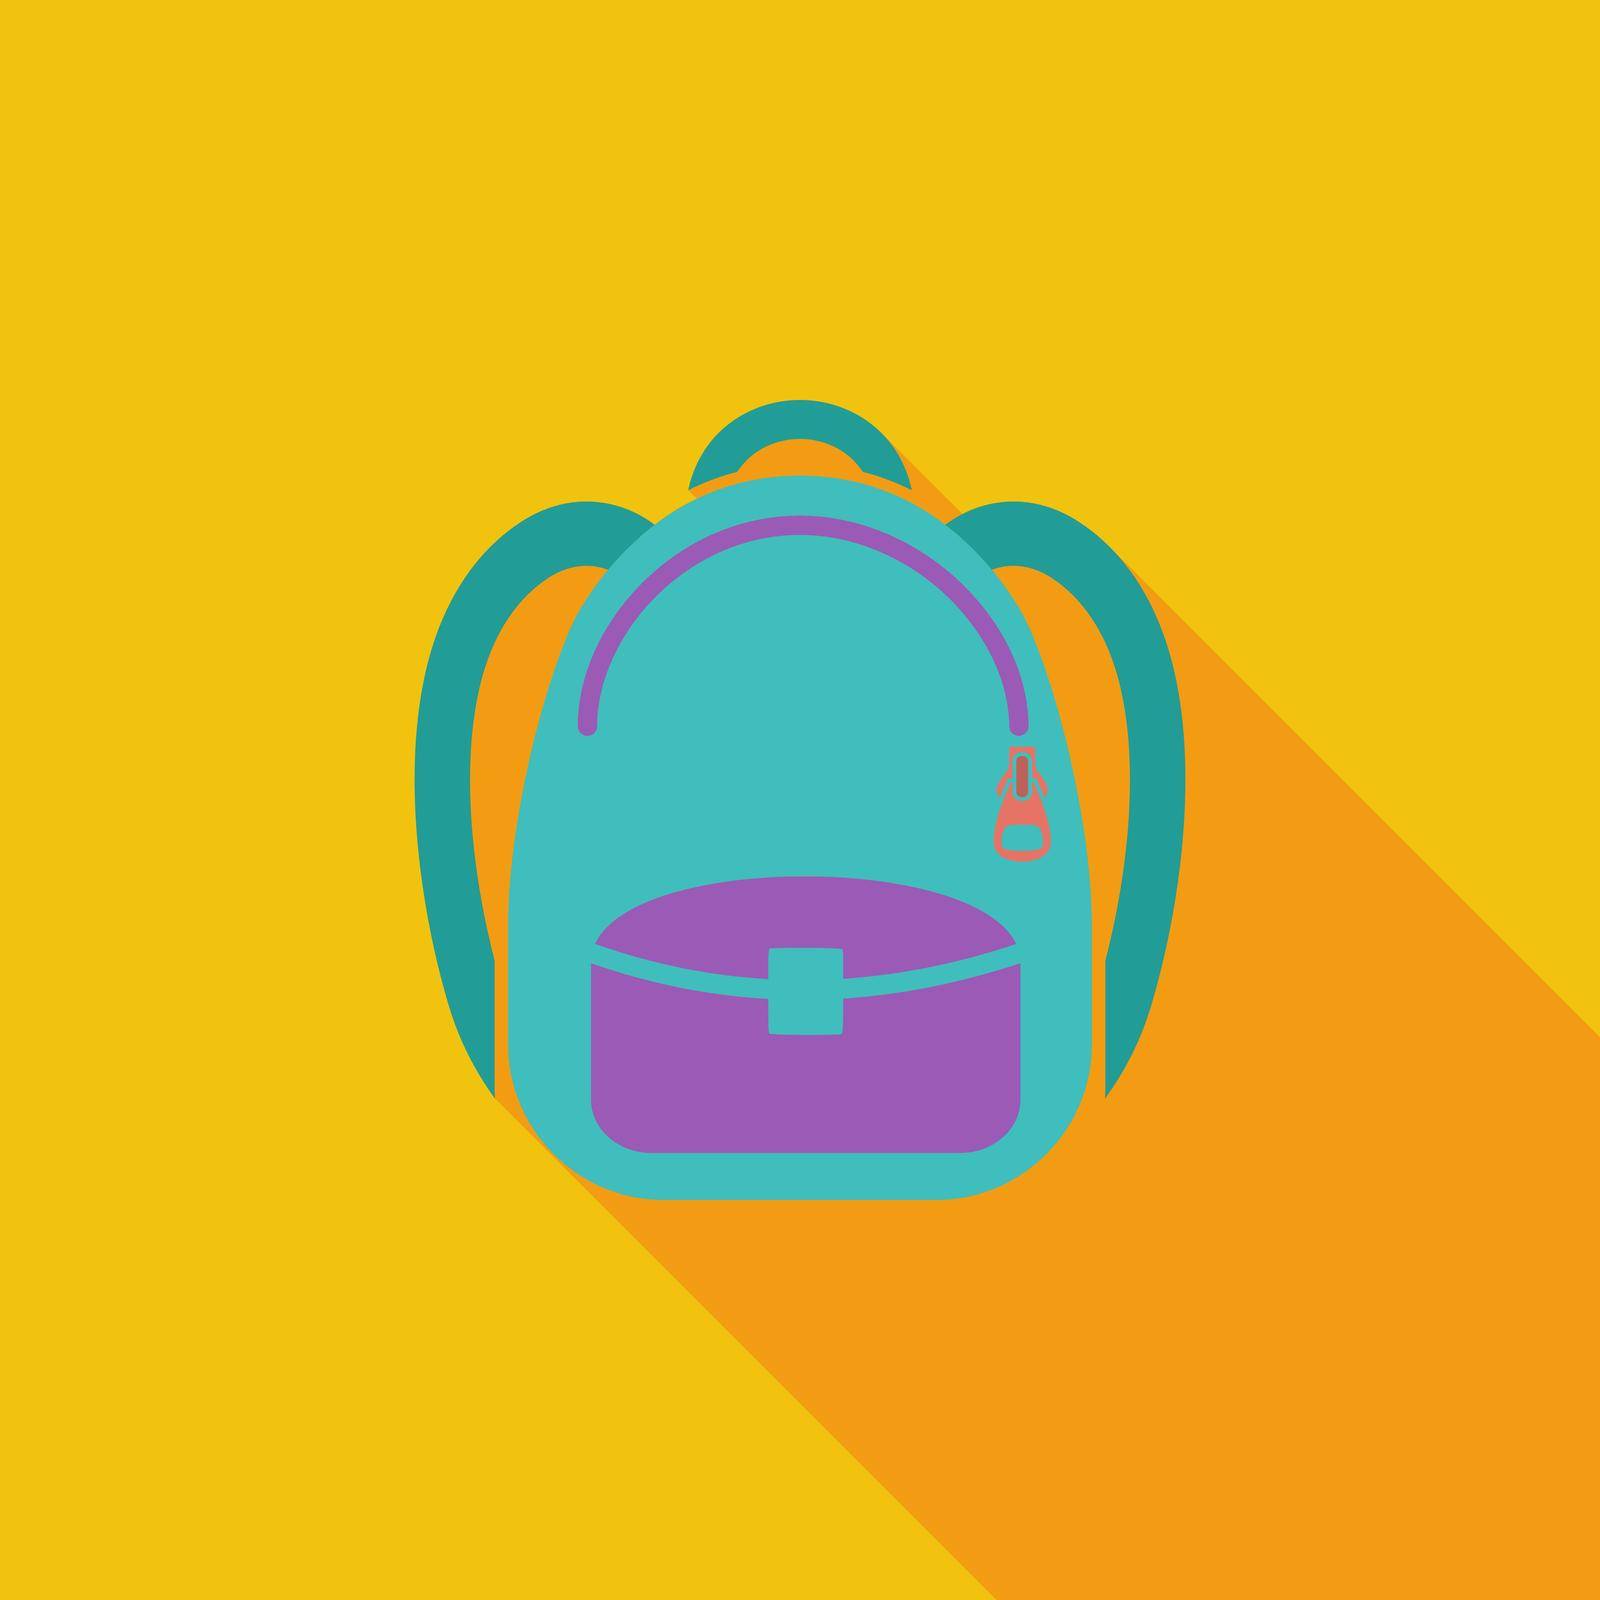 Schoolbag icon. Flat vector related icon with long shadow for web and mobile applications. It can be used as - logo, pictogram, icon, infographic element. Vector Illustration.